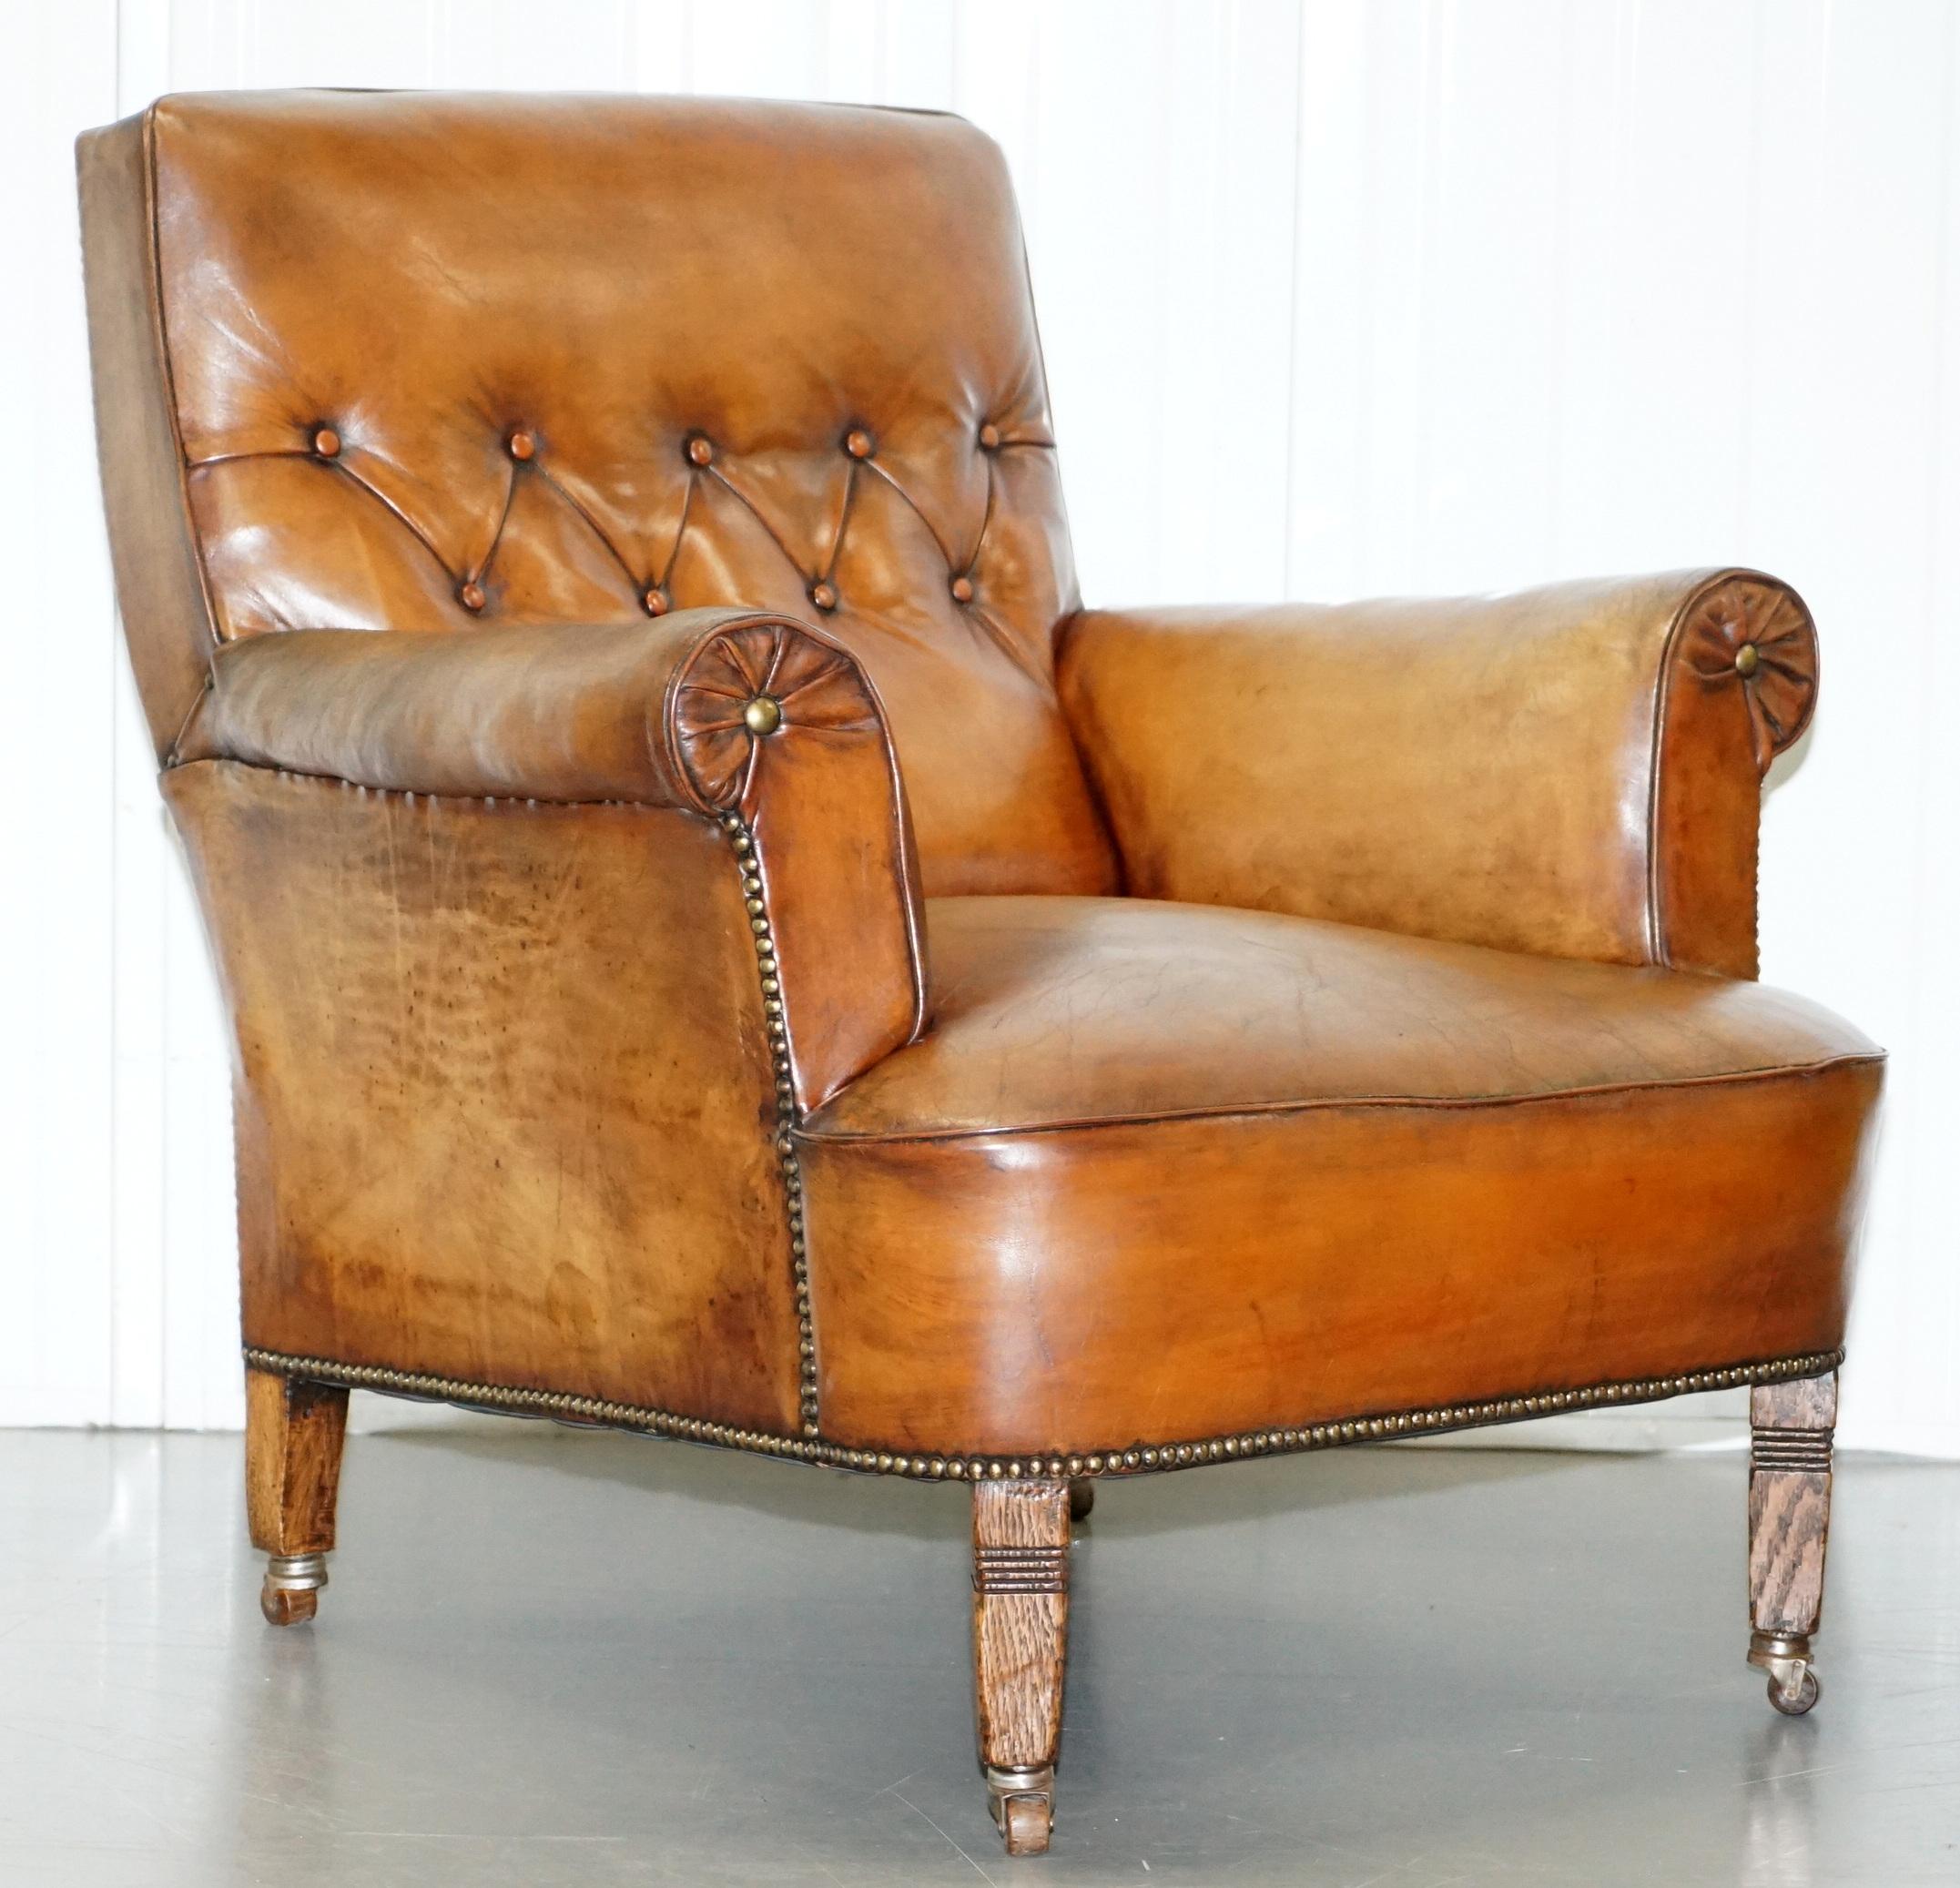 We are delighted to offer for sale this exceptional pair of very rare library reading armchairs with hand dyed brown leather upholstery

A very good looking well made and decorative pair of Library armchairs, these are the quintessential English